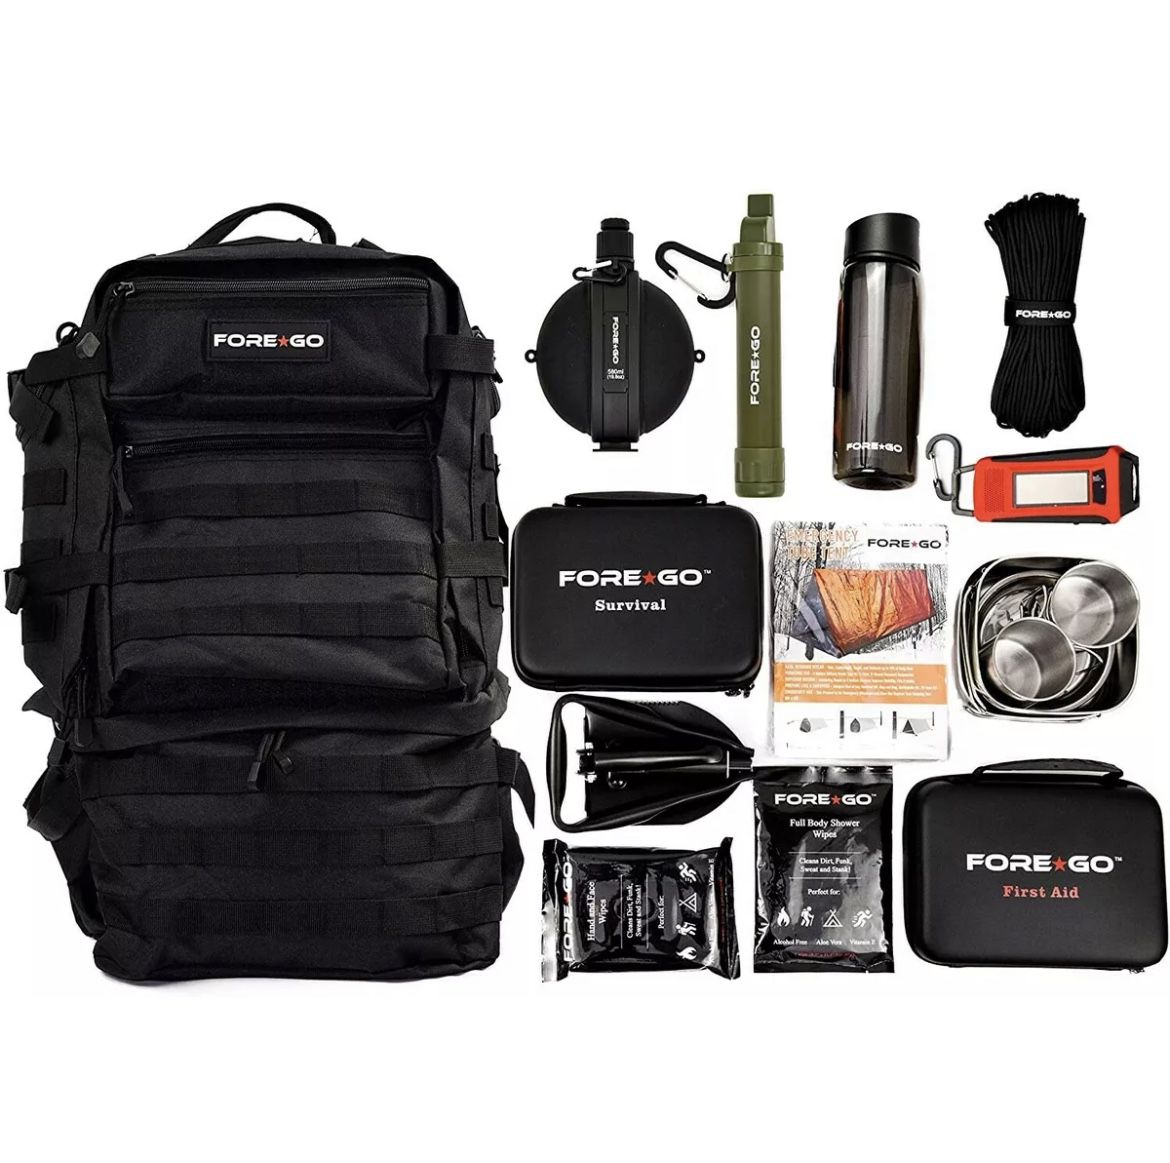 FOREGO - Survival Backpack Kit for camping, surviving, hiking and bugging out